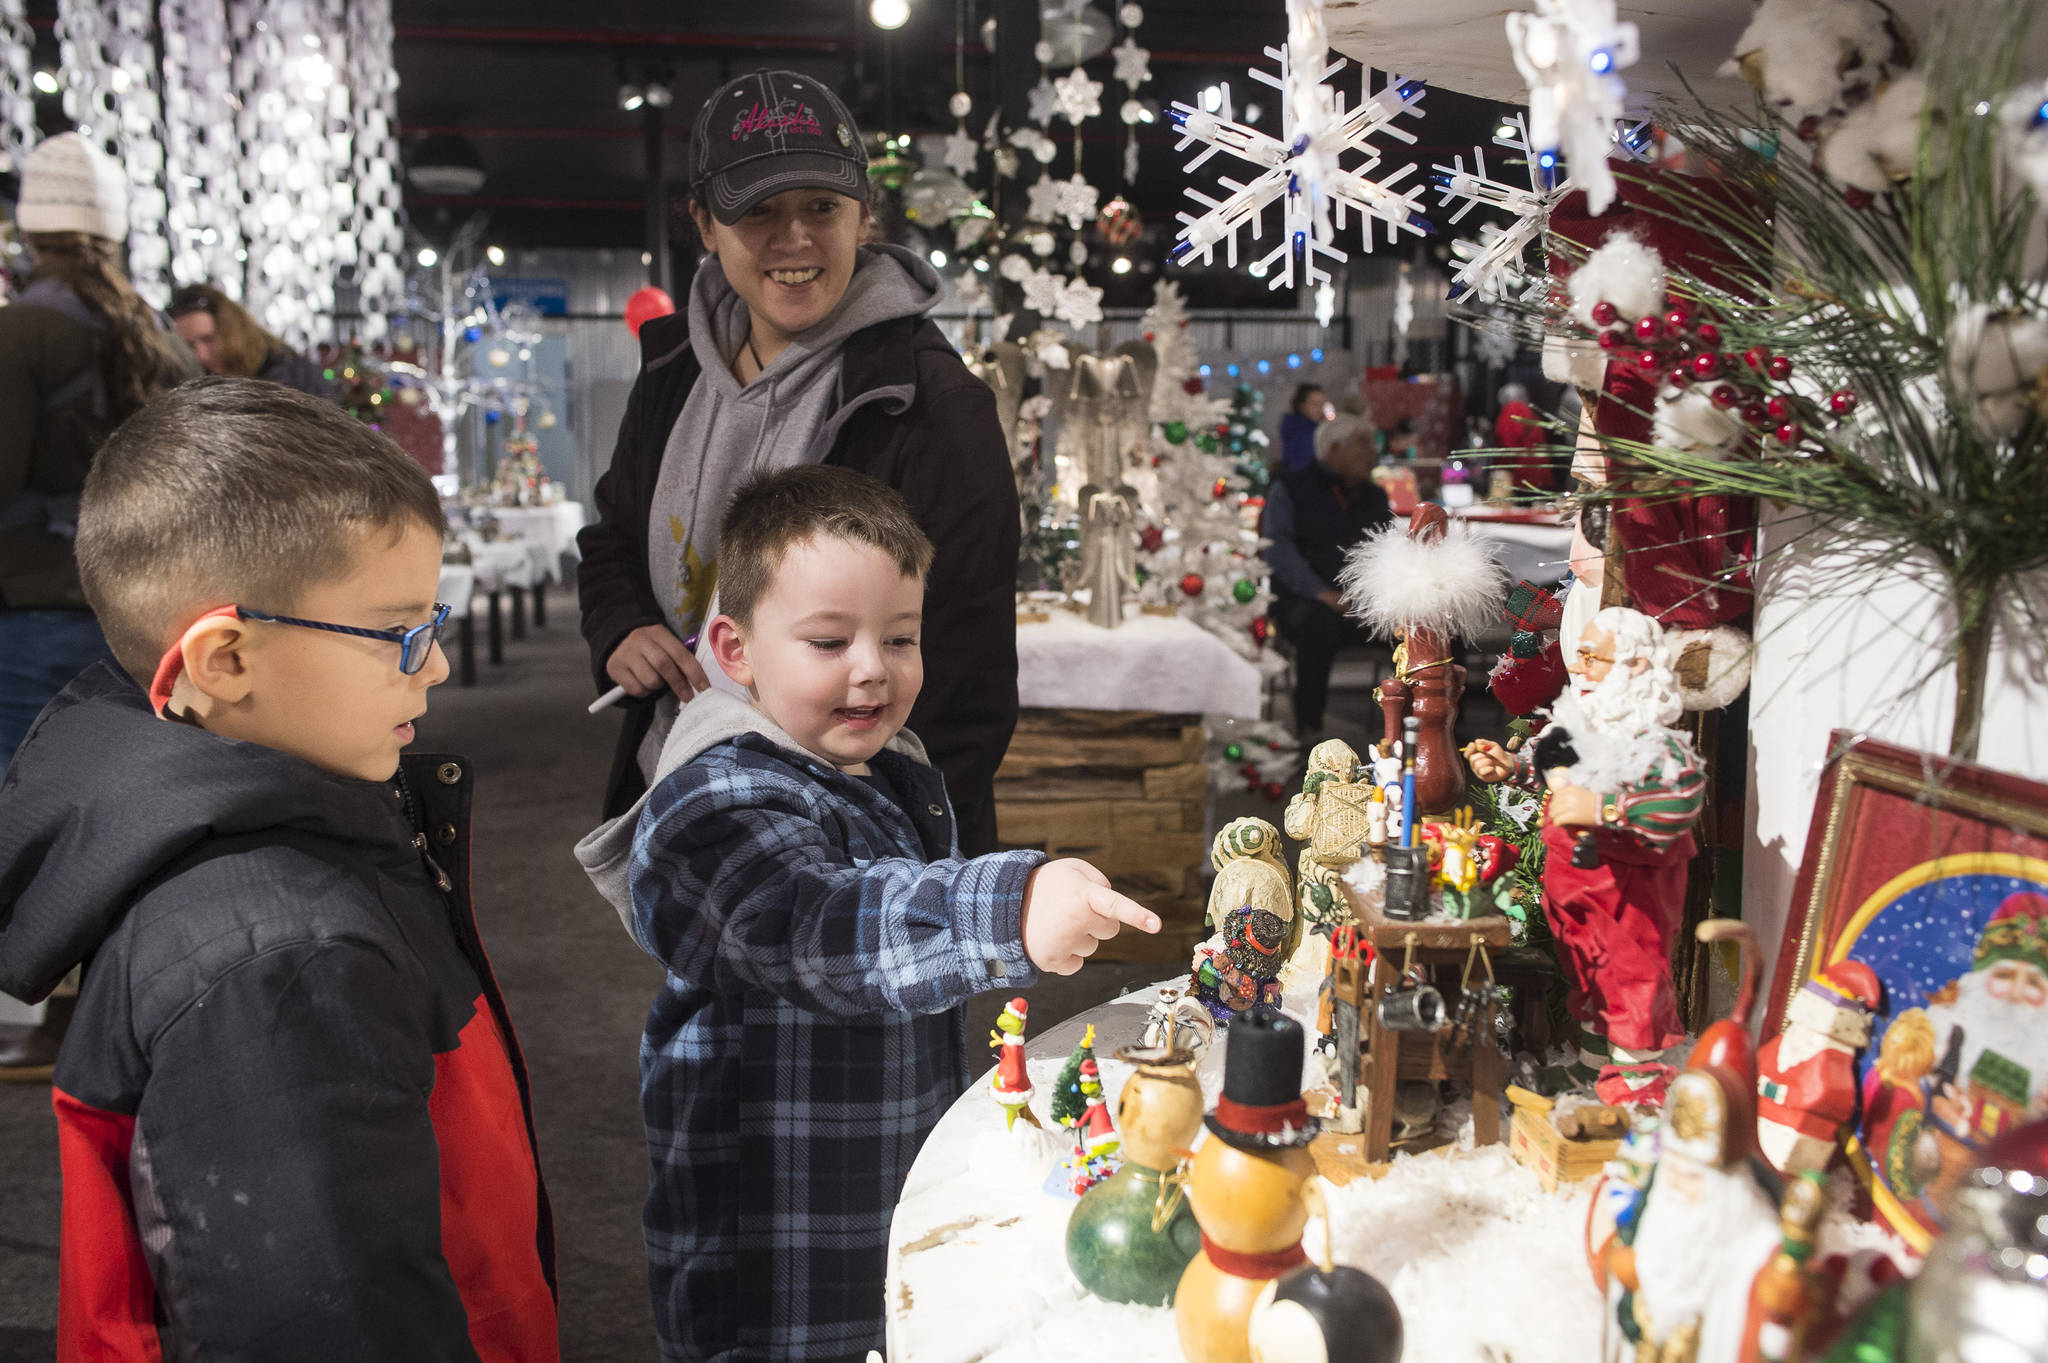 Delilah Bernaldo watches Kale Smith, 6, center, and Alec Muldoon, 4, as they look at the display at Holiday Village in the Alaska Shirt Company in December 2017. The village is a fundraiser for the Southeast Alaska Food Bank, Meals on Wheels, AWARE and The Glory Hall. (Michael Penn | Juneau Empire File)